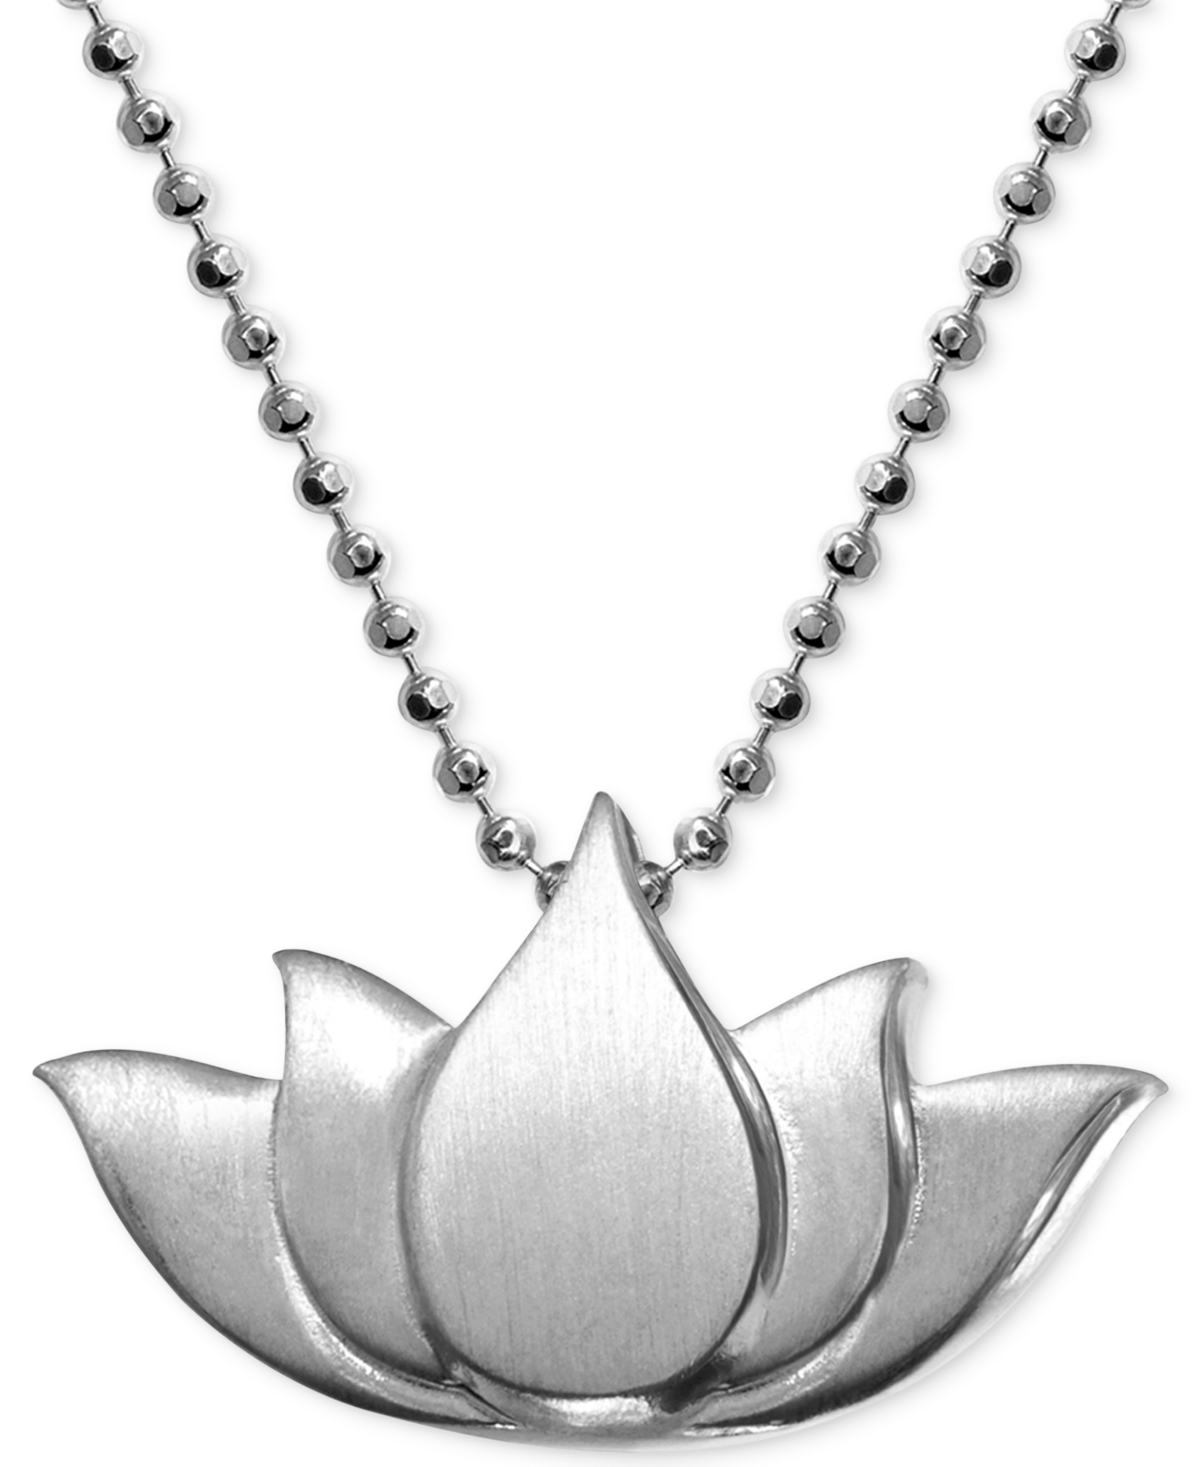 Alex Woo Little Faith Lotus Blossom Pendant Necklace in Sterling Silver